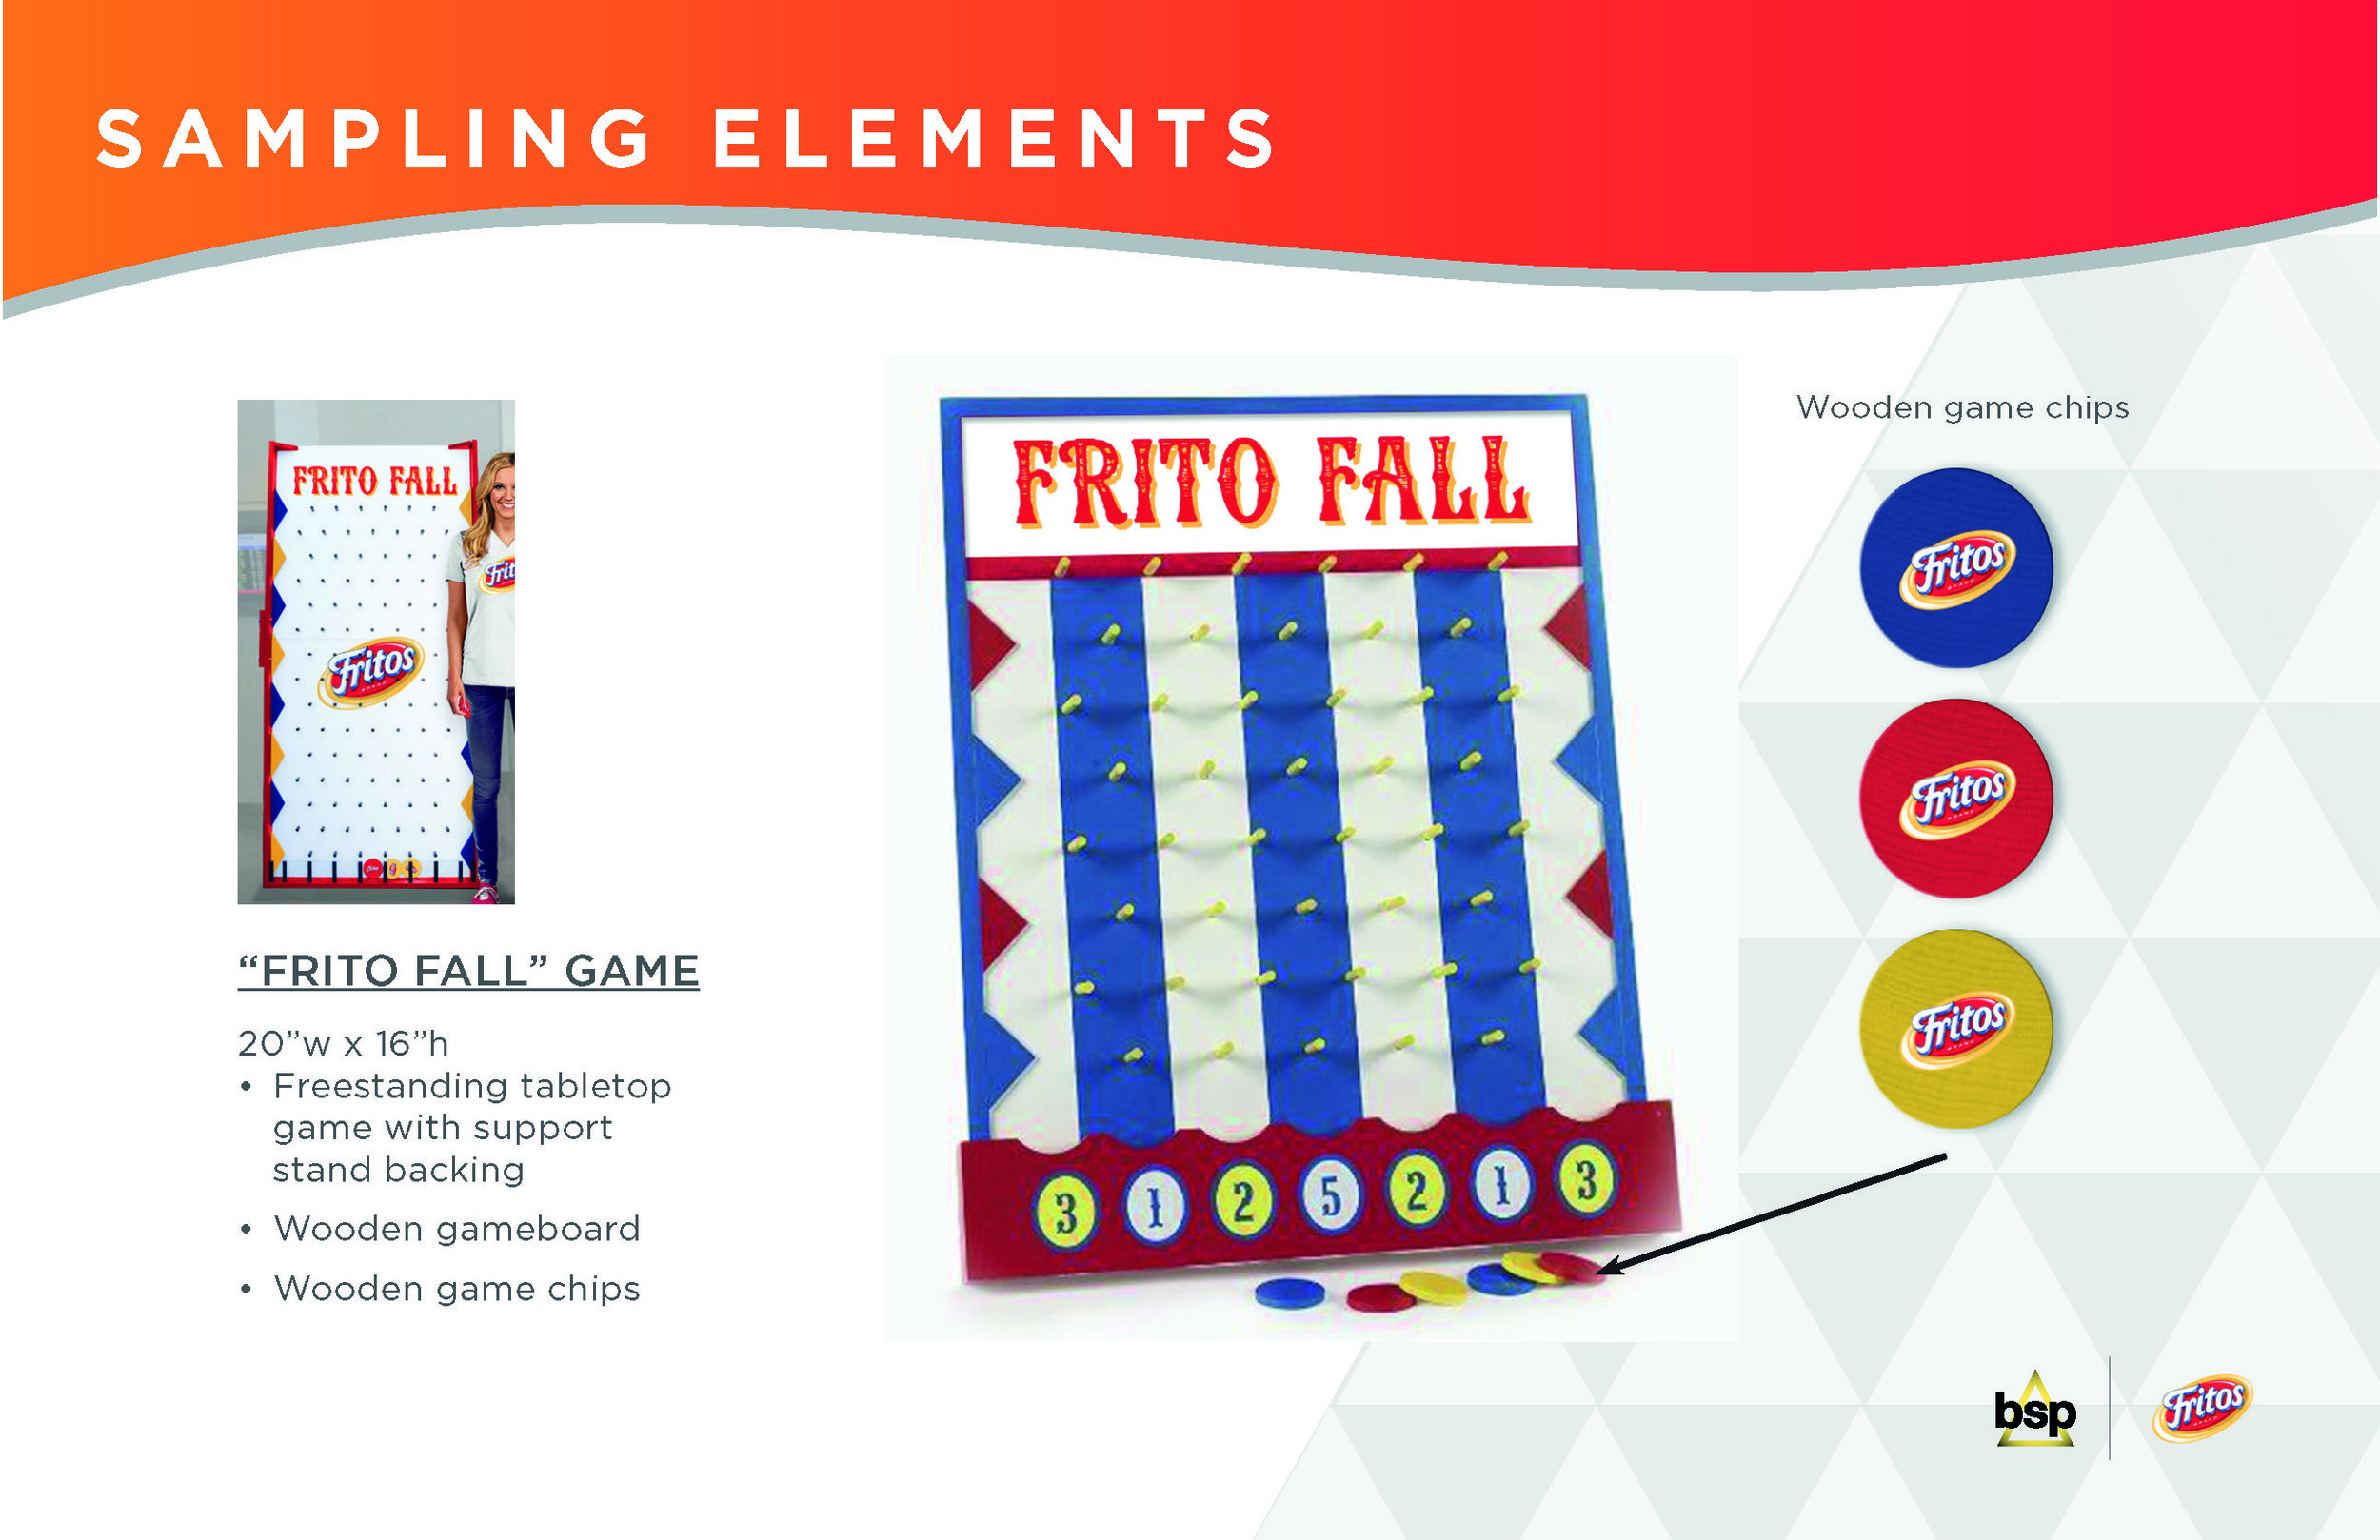 Fritos_SW_Elements.0810_Page_5.jpg